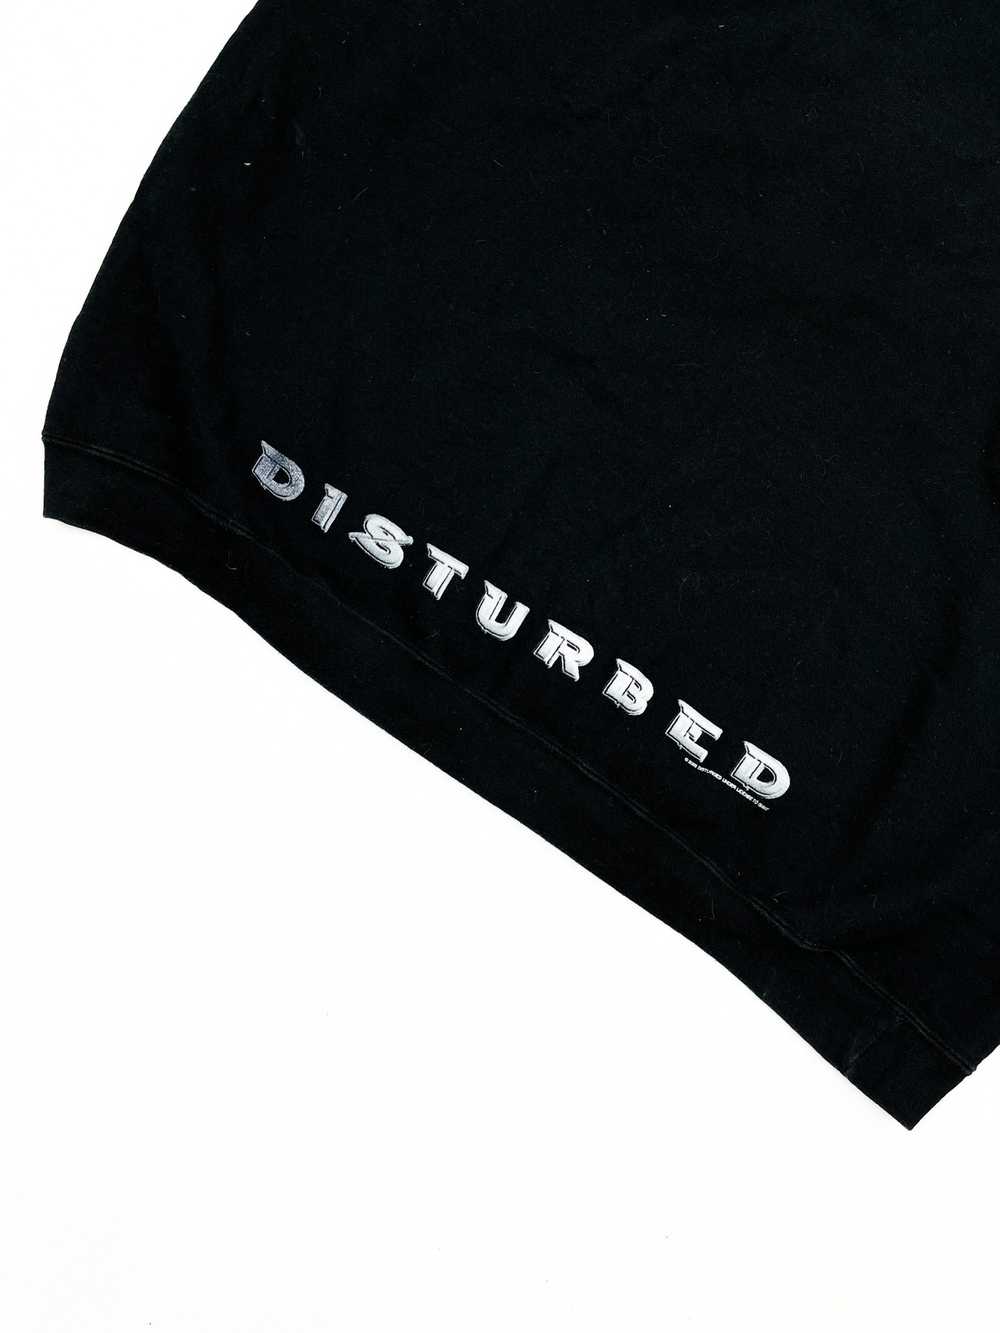 Band Tees × Rock Band Disturbed Believe tour 2002… - image 4